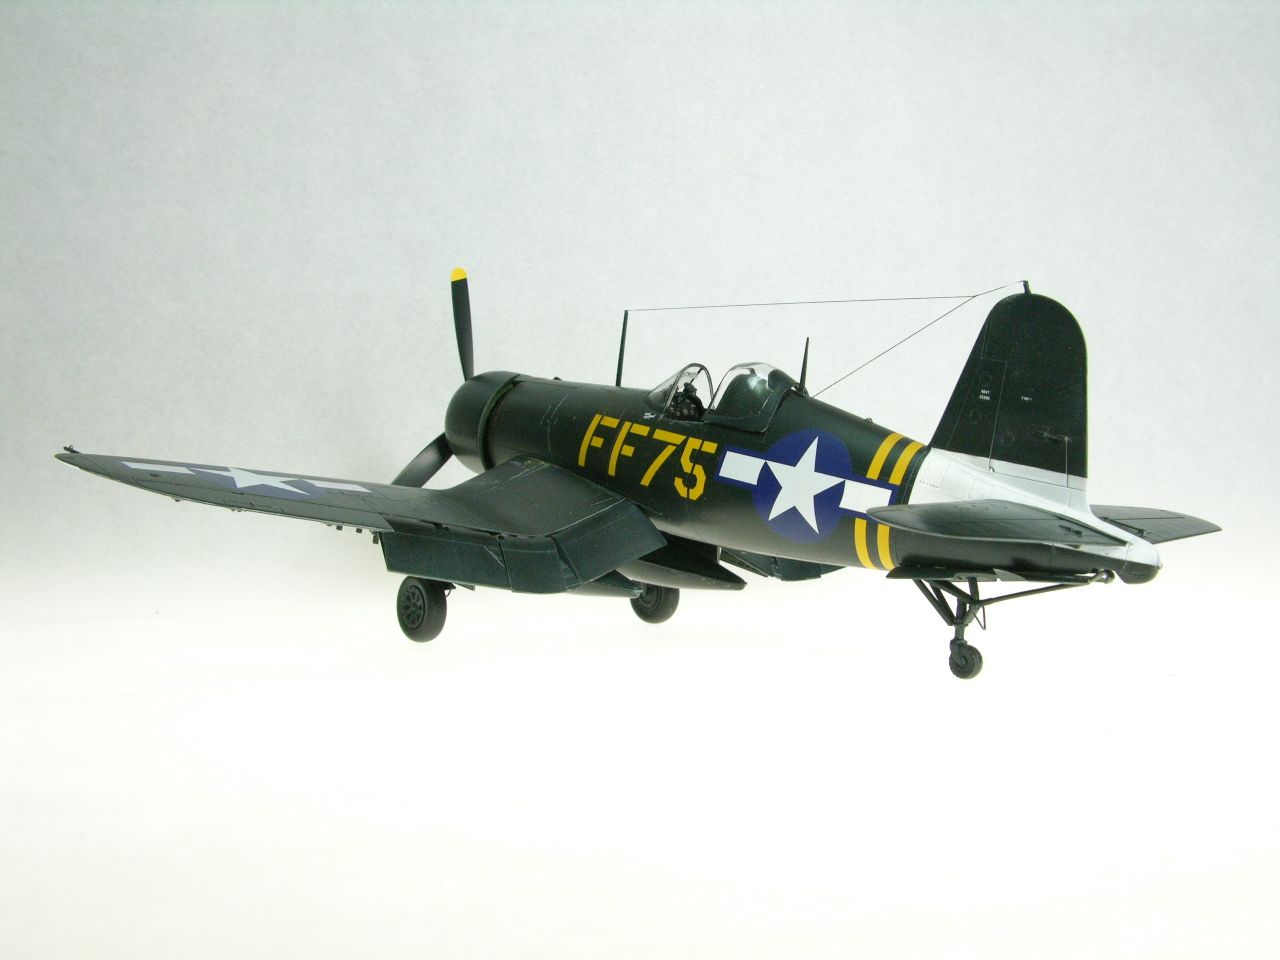 F4U-1D Corsair (Tamiya)
This is the Tamiya F4U-1D Corsair finished as Lt. Col. Donald Yost's airplane of VMF 351 from USS Cape Gloucester, ca. August, 1945. Decals are from BaracudaCals, interior details are Eduard.
